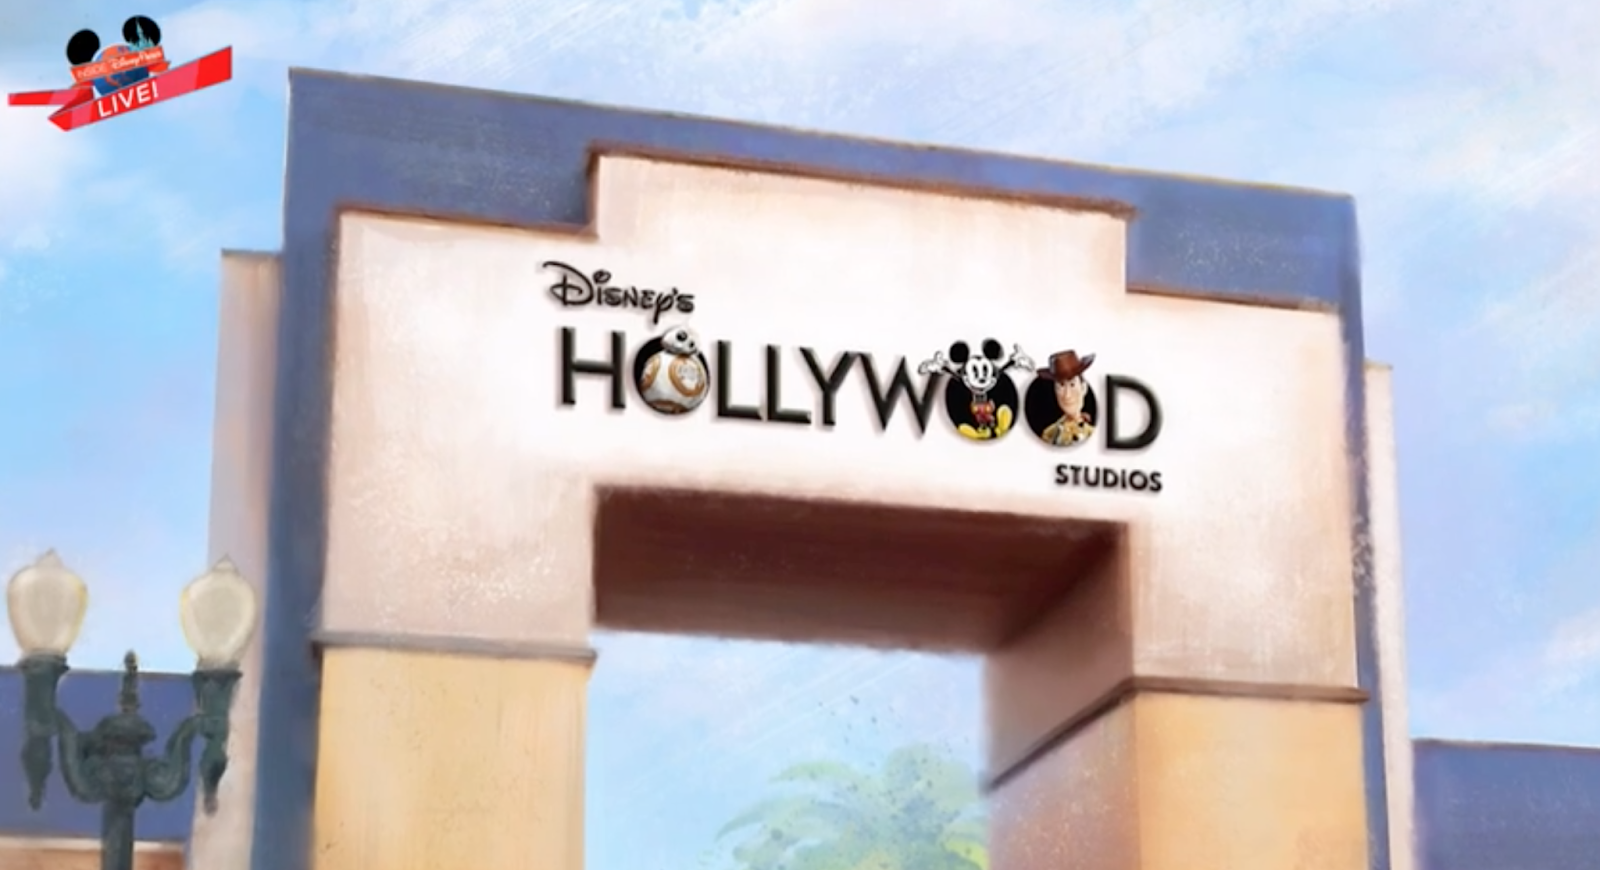 Disney's Hollywood Studios Unveils New Logo Featuring Woody, BB-8 and